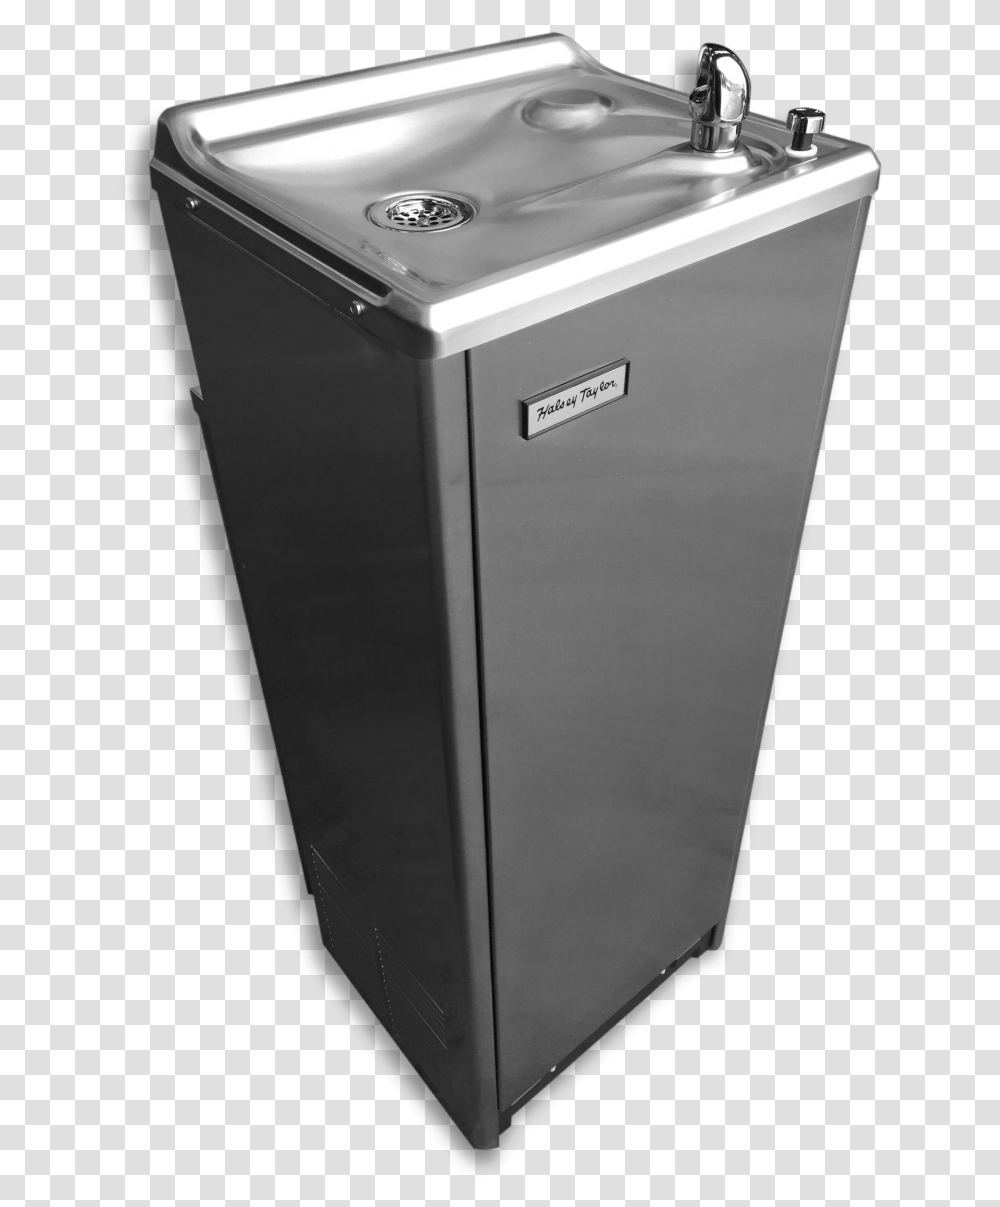 Download Halsey Taylor Hof14a Fr Q Drinking Fountain Water Dispenser, Appliance, Washer, Mailbox, Letterbox Transparent Png